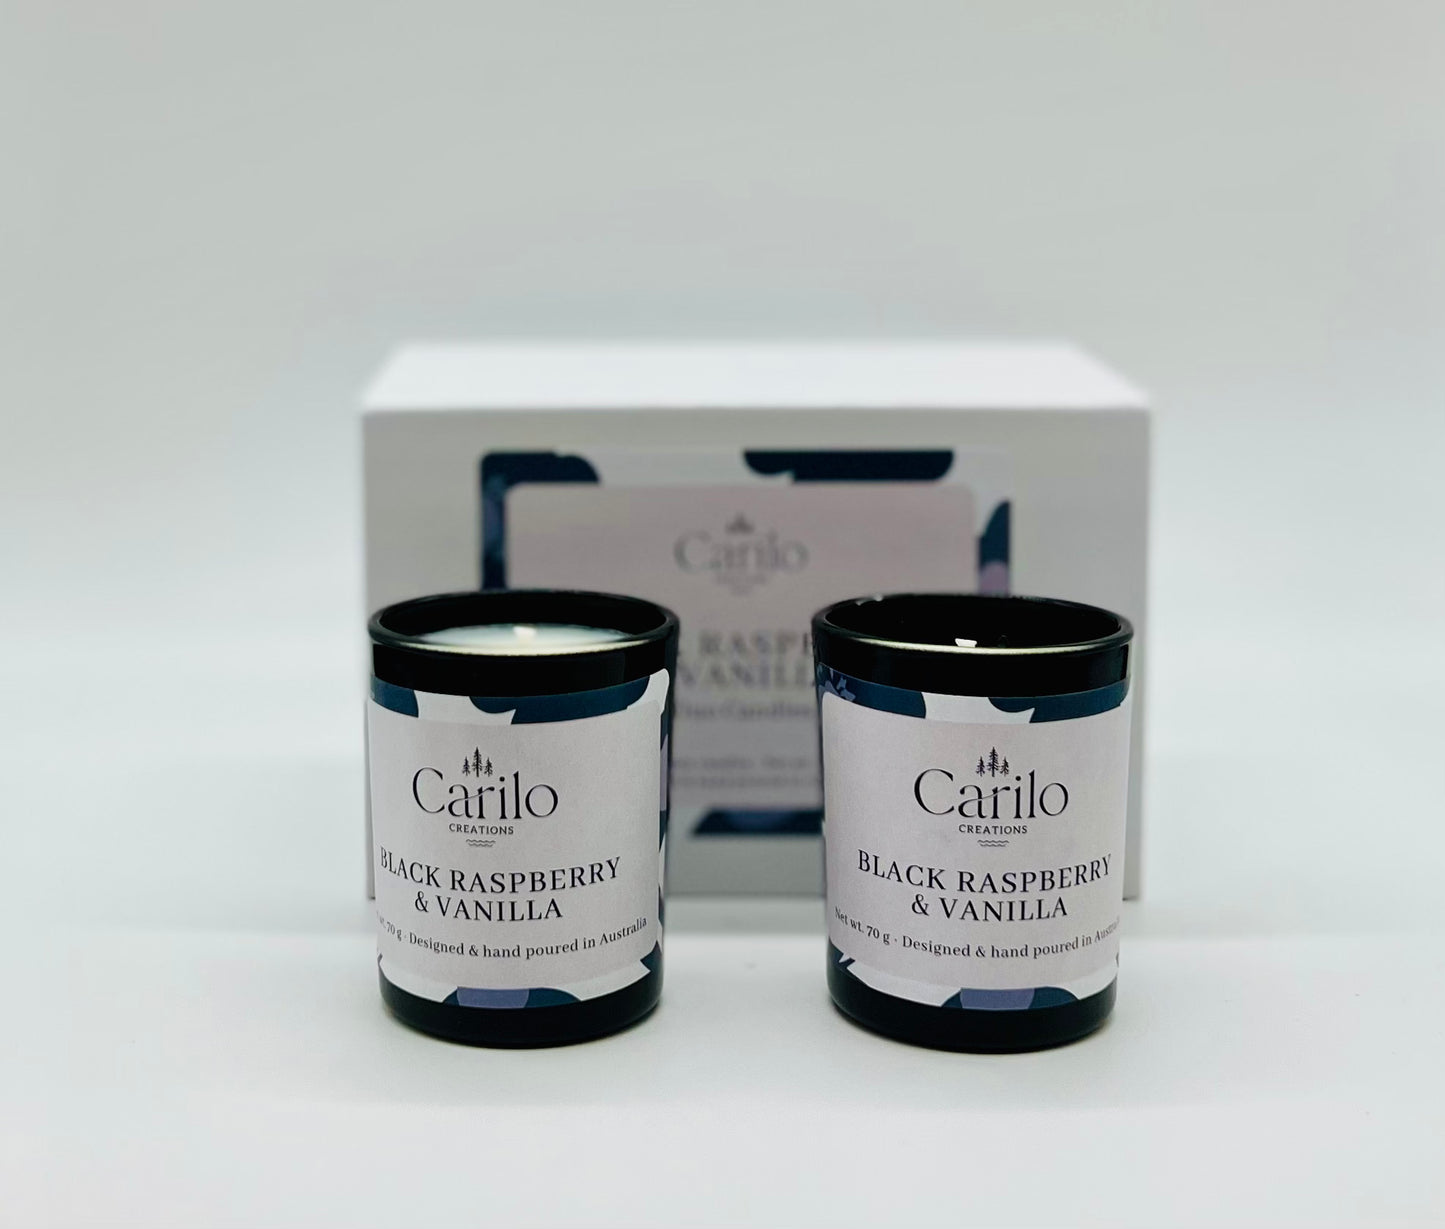 BLACK RASPBERRY & VANILLA - DELUXE DUO SCENTED CANDLES - 70g each